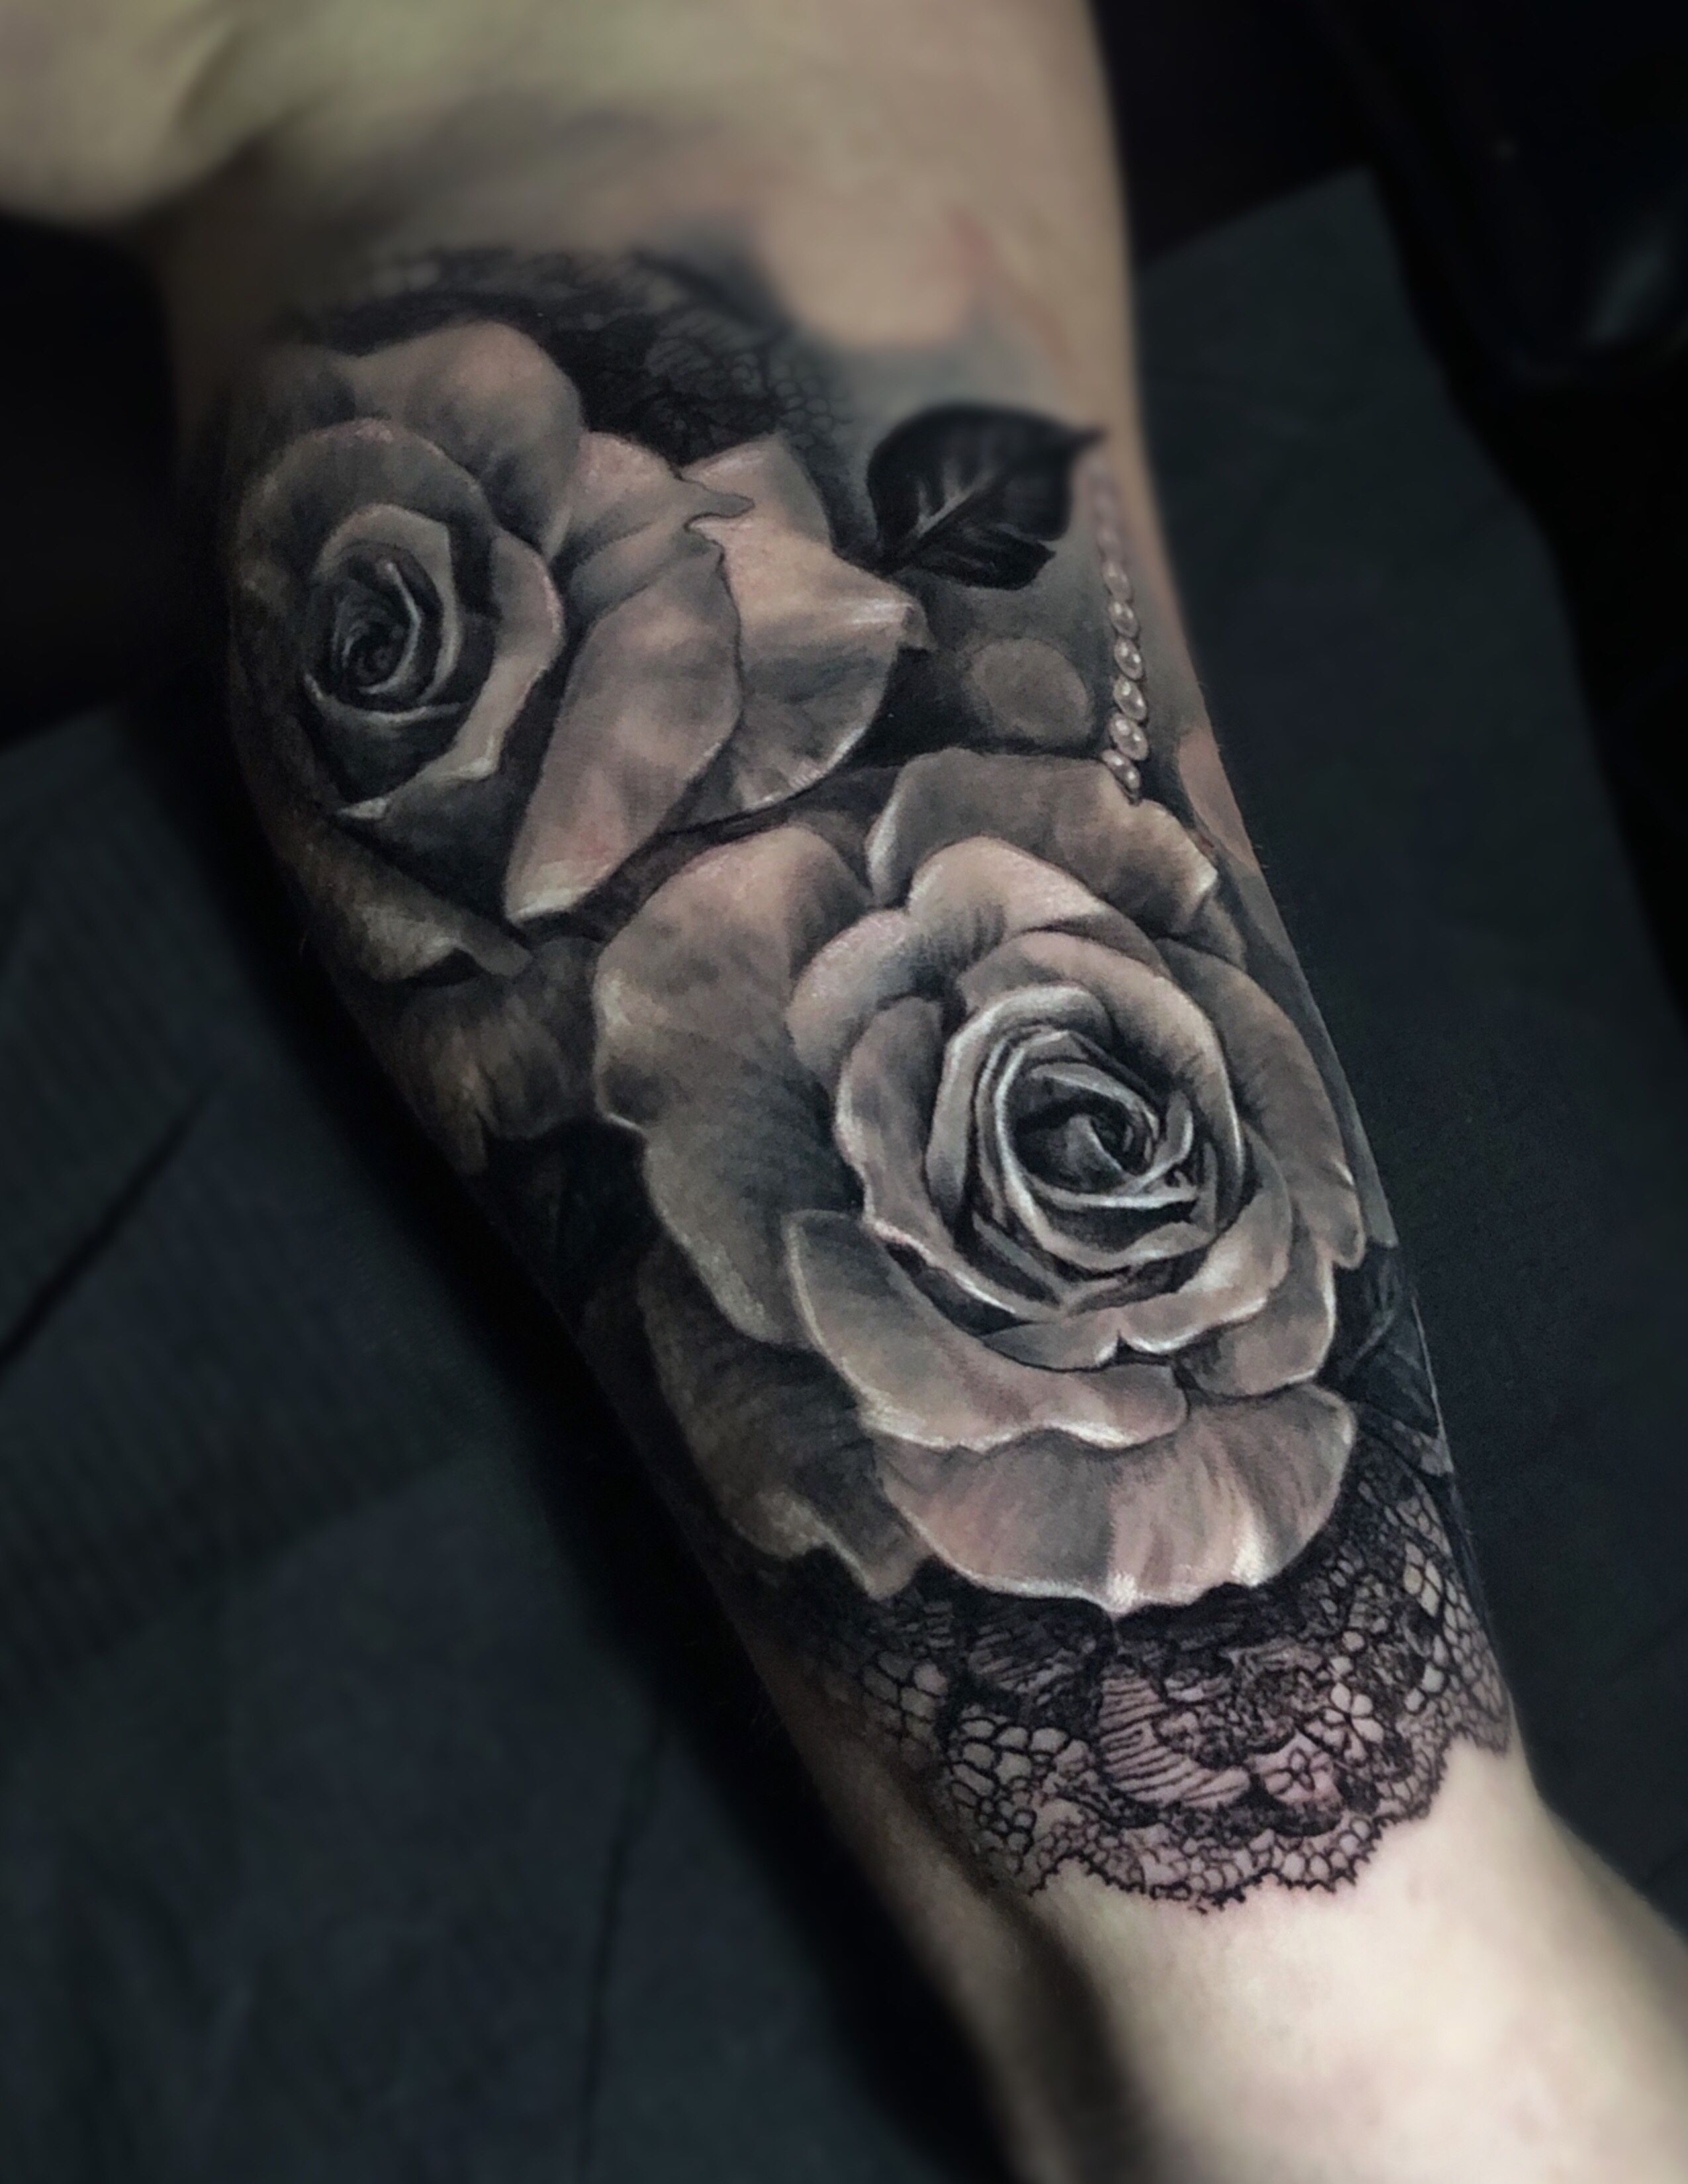 Aggregate more than 76 rose tattoo with lace best - in.cdgdbentre